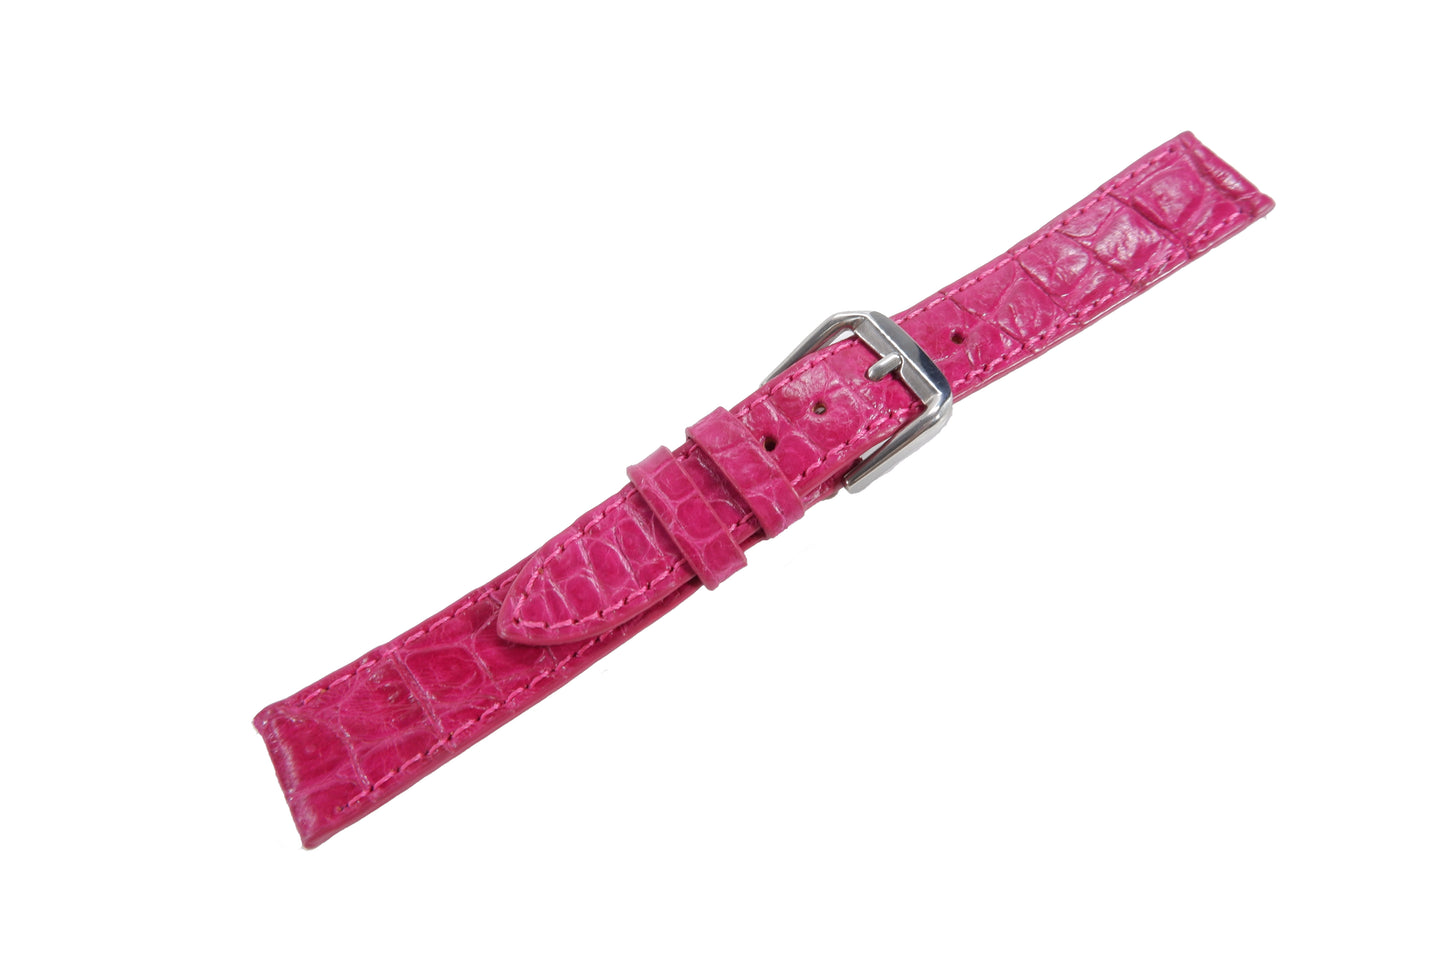 Genuine Crocodile Skin Leather Watch Strap Pink Band with Buckle